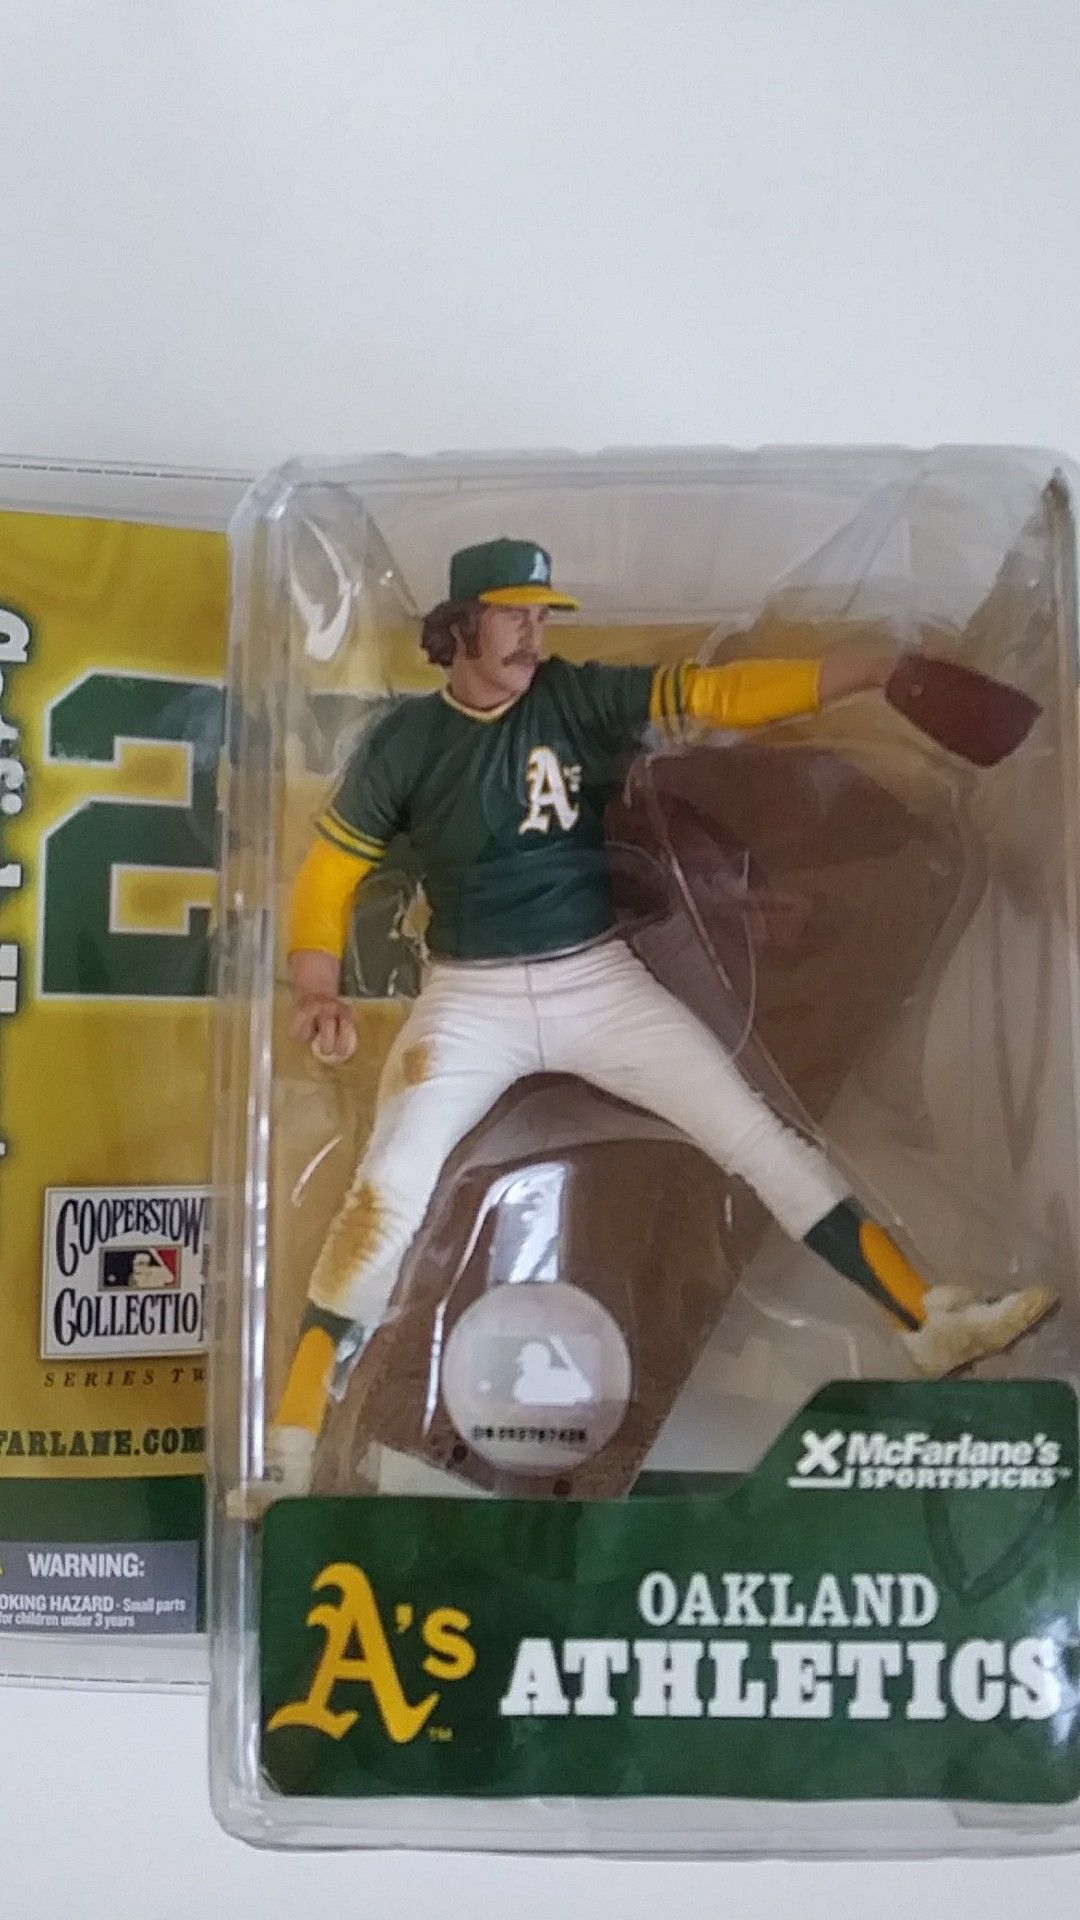 McFarlane toys MLB Cooperstown collection series action figure Jim catfish hunter